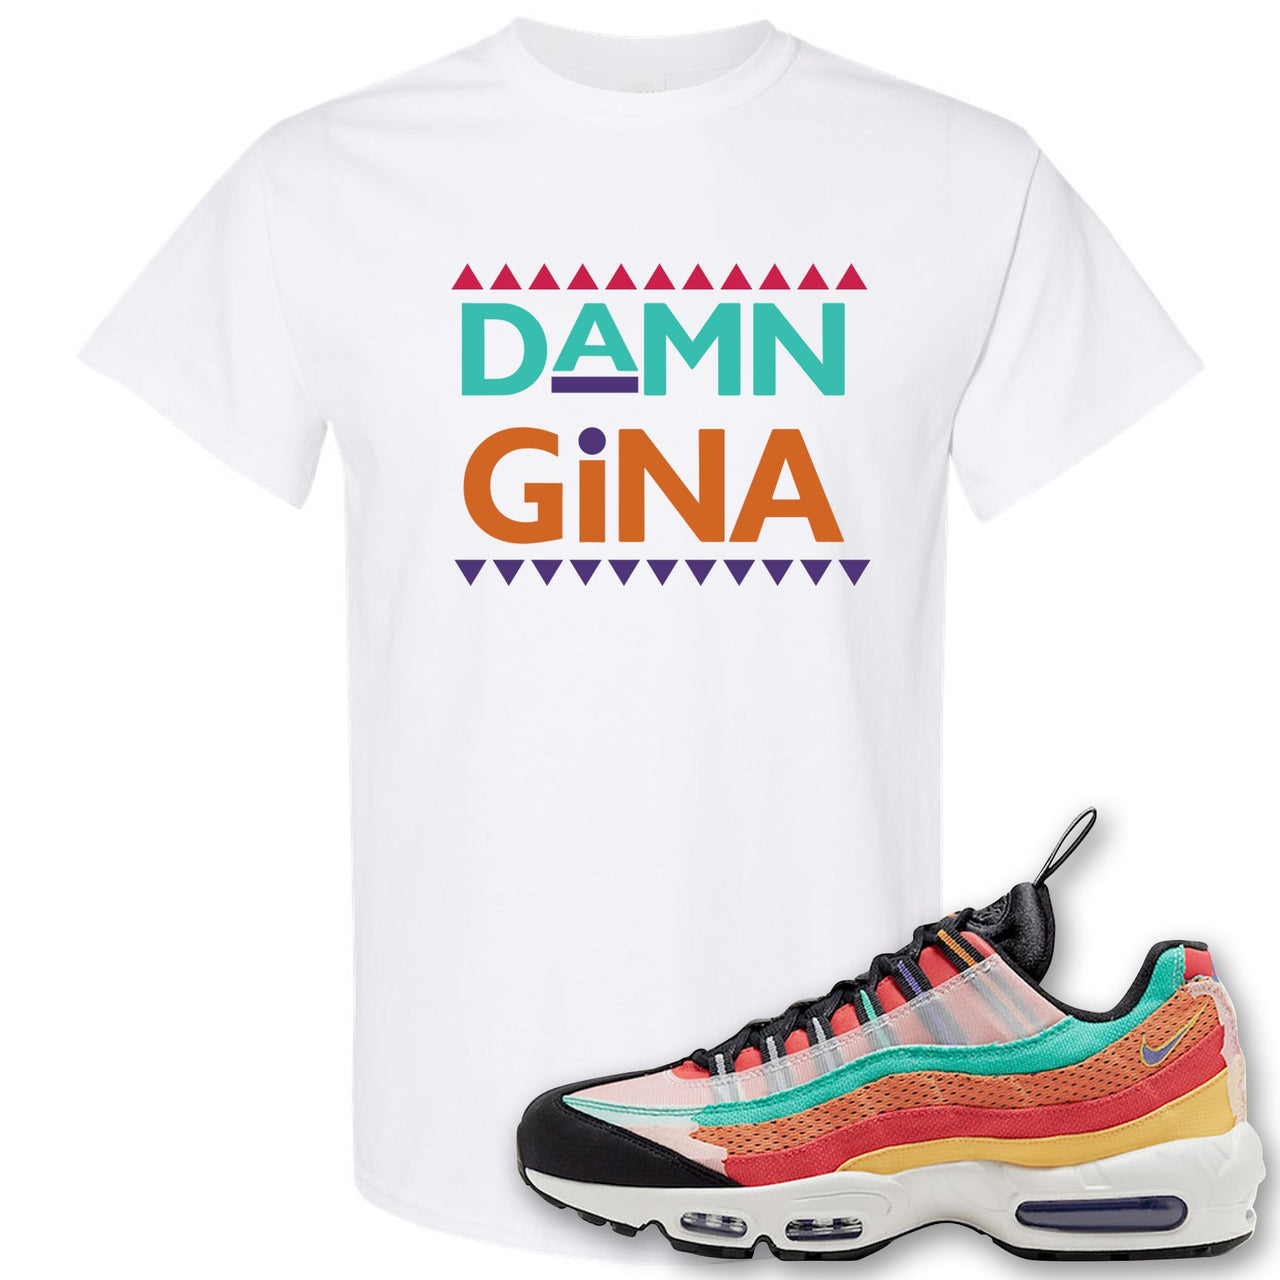 Air Max 95 Black History Month Sneaker White T Shirt | Tees to match Nike Air Max 95 Black History Month Shoes | Damn Gina